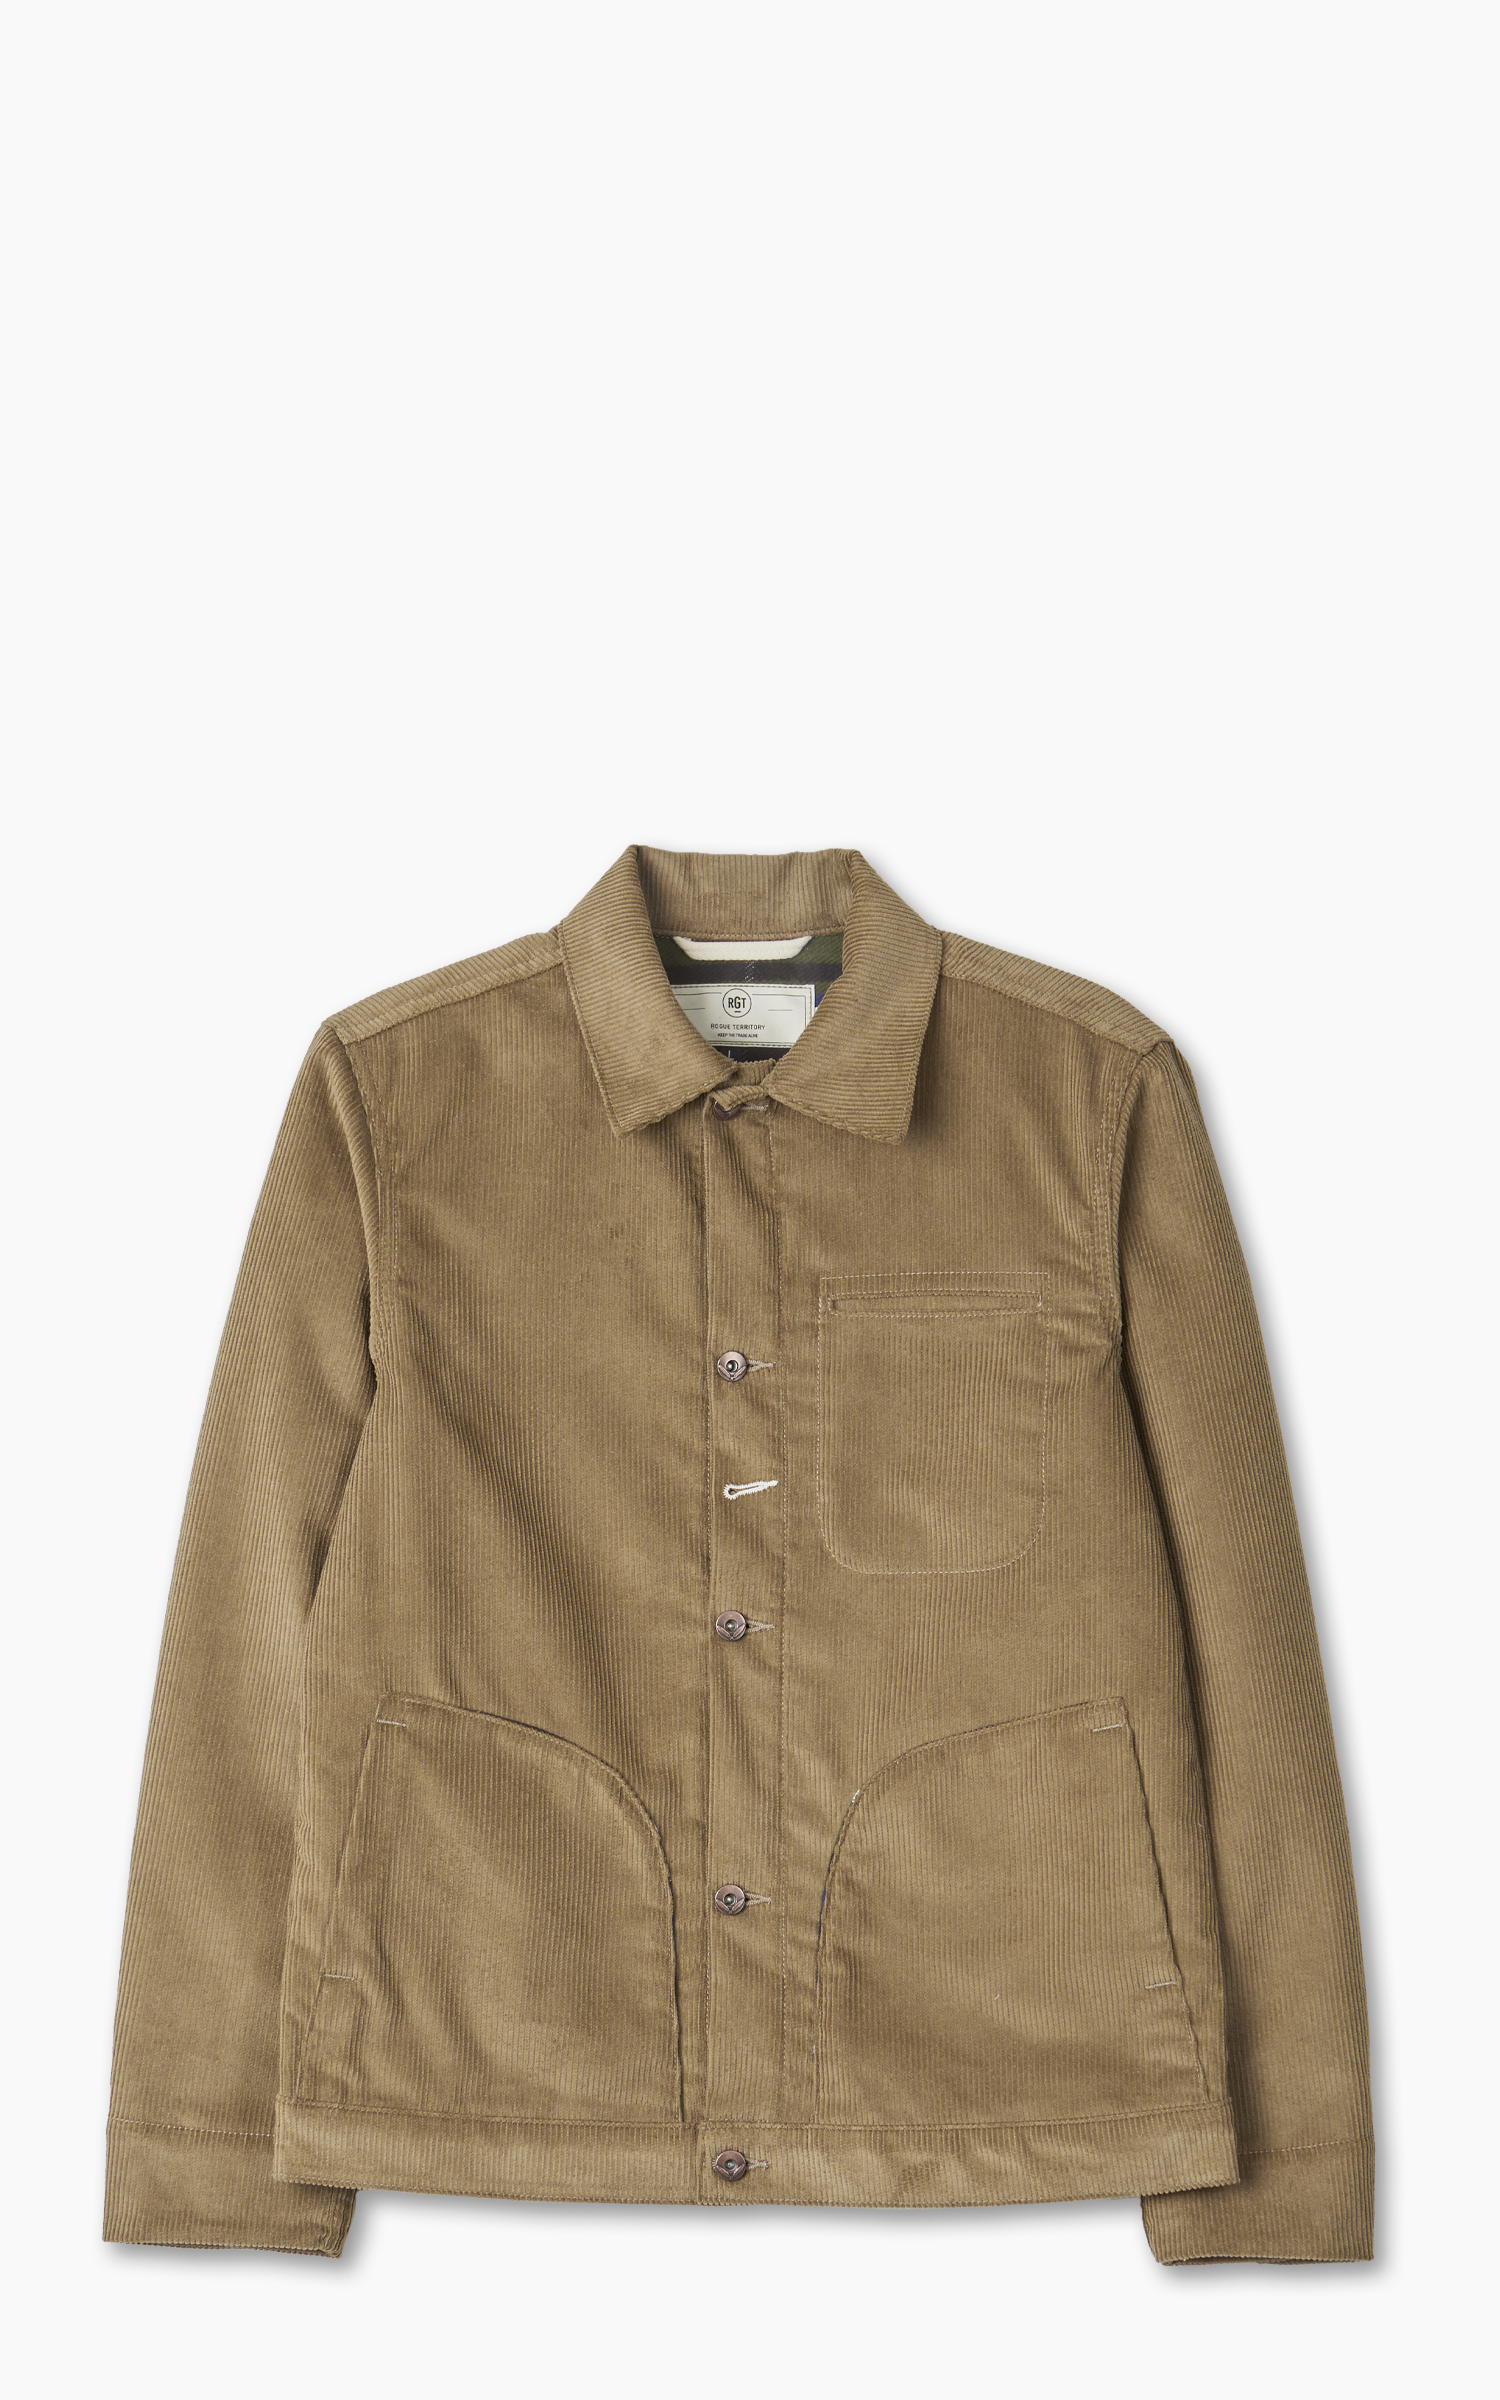 Rogue Territory Supply Jacket Tan Corduroy Lined | Cultizm